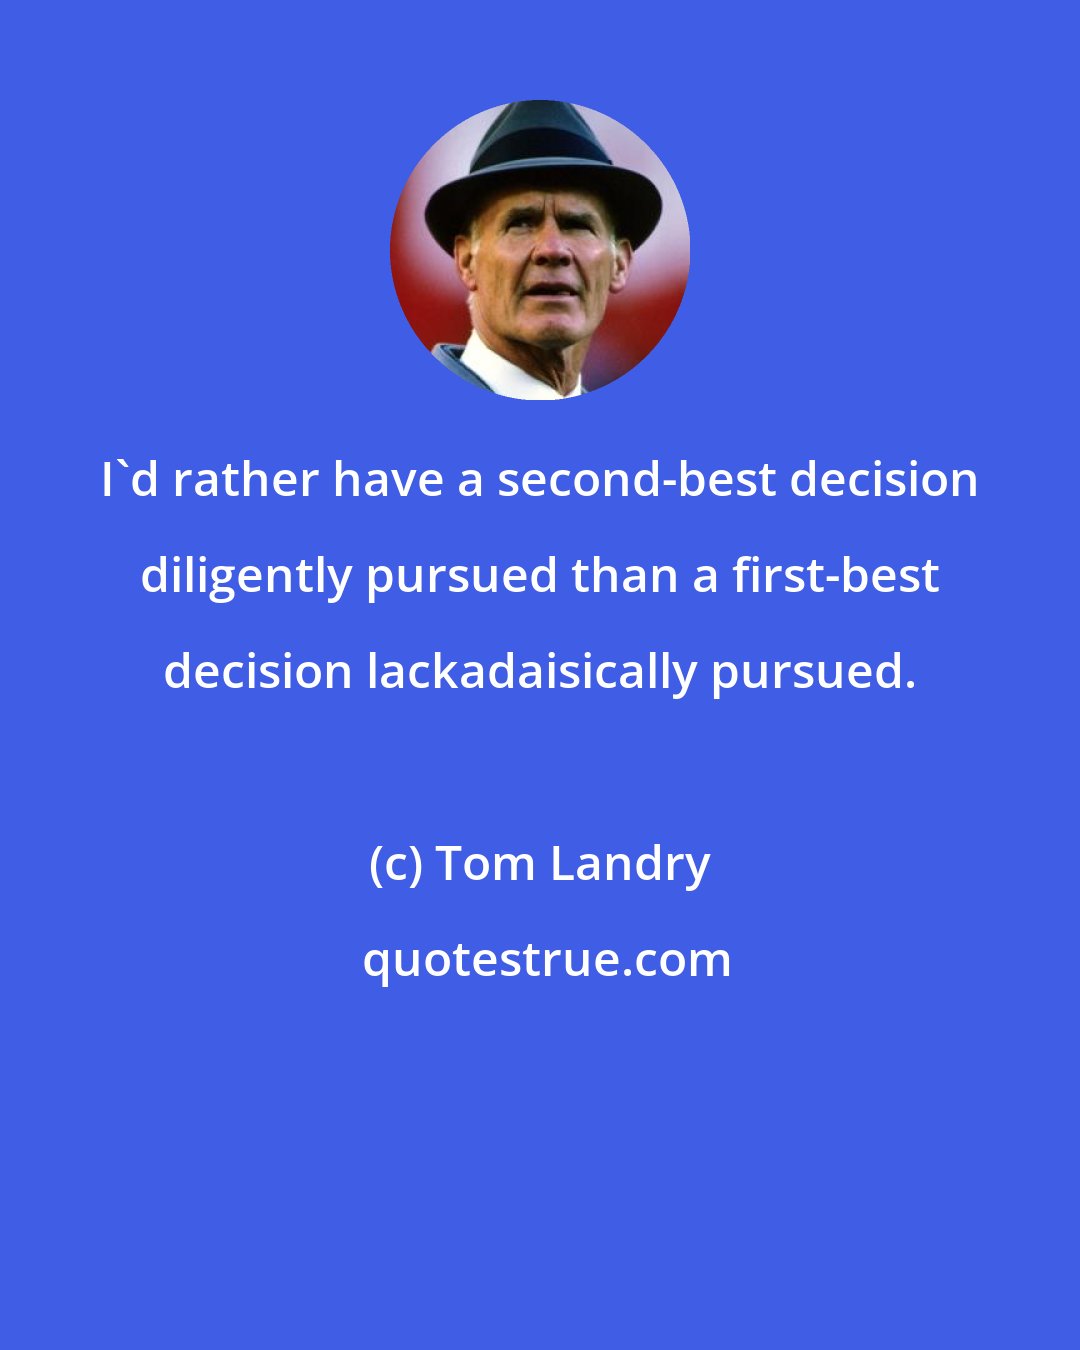 Tom Landry: I'd rather have a second-best decision diligently pursued than a first-best decision lackadaisically pursued.